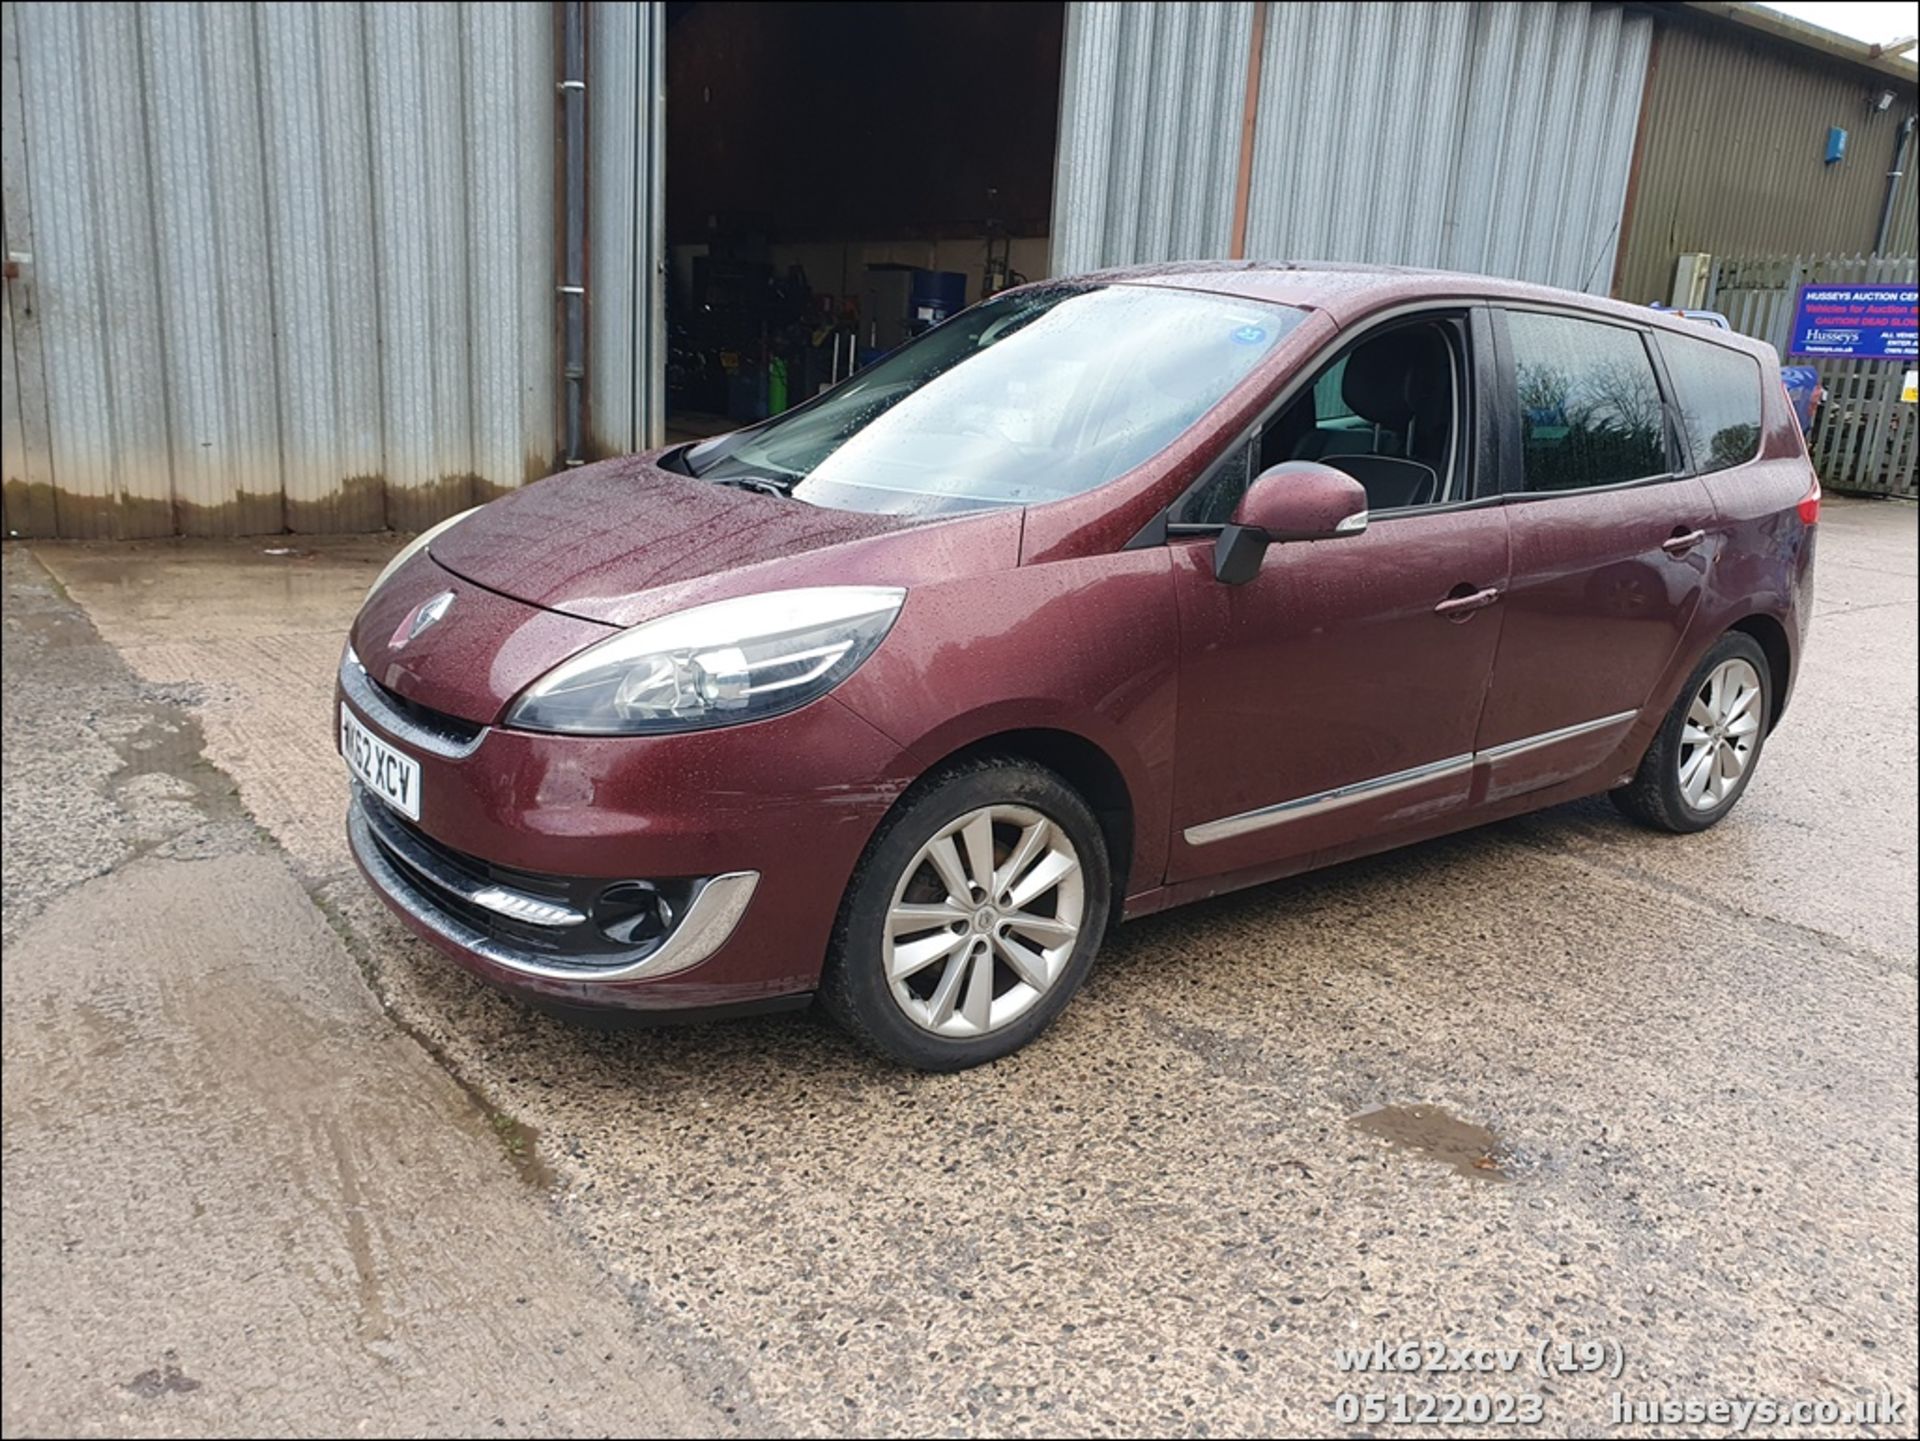 12/62 RENAULT G SCENIC D-QUETTLUXE NRG - 1598cc 5dr MPV (Red) - Image 20 of 53